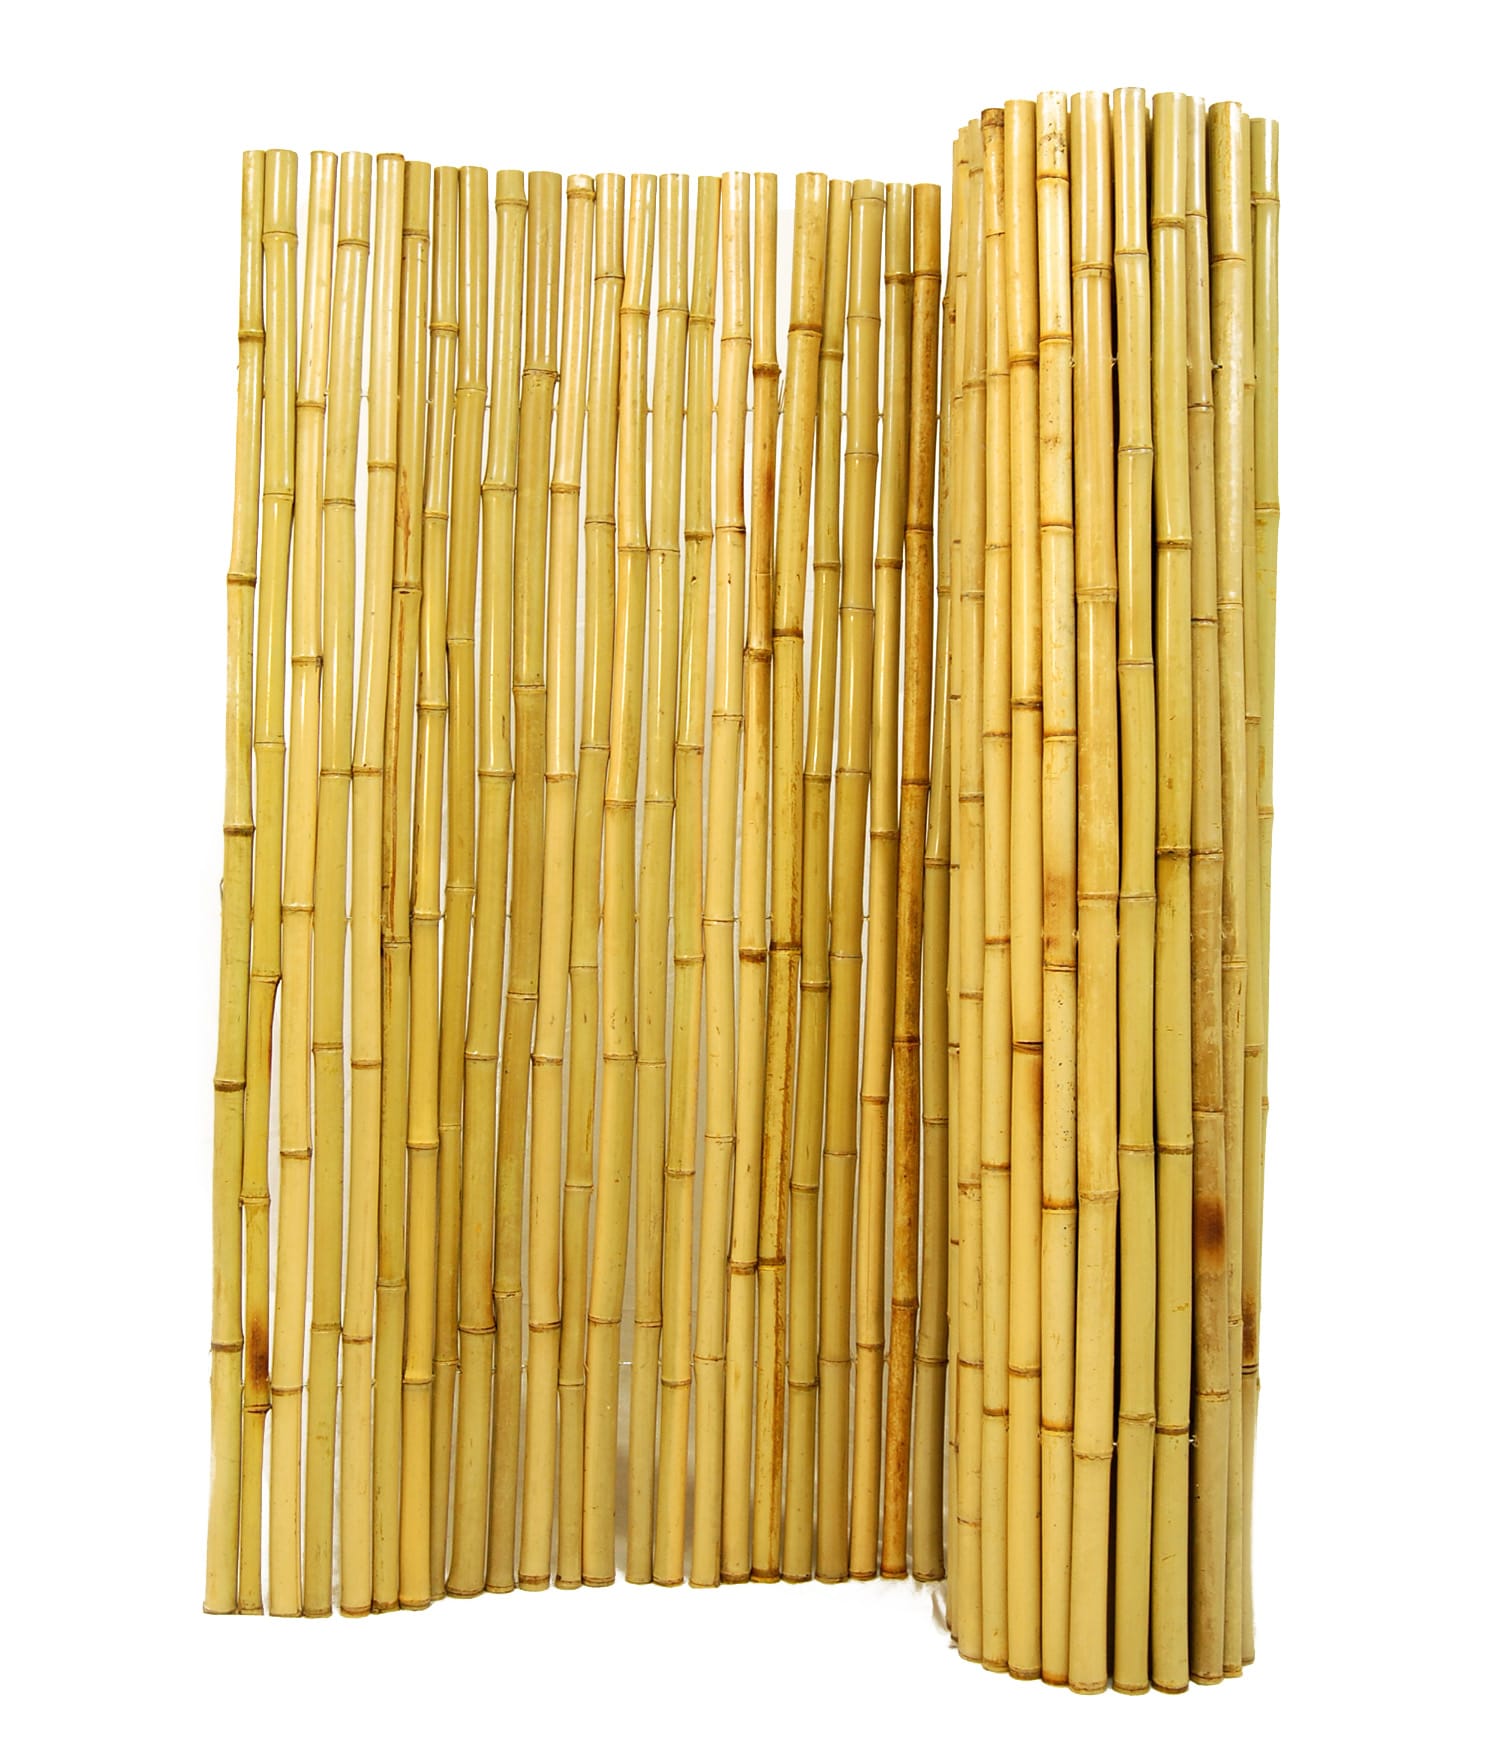 Bamboo Down Under  Premium Bamboo Range (High End Landscaping)